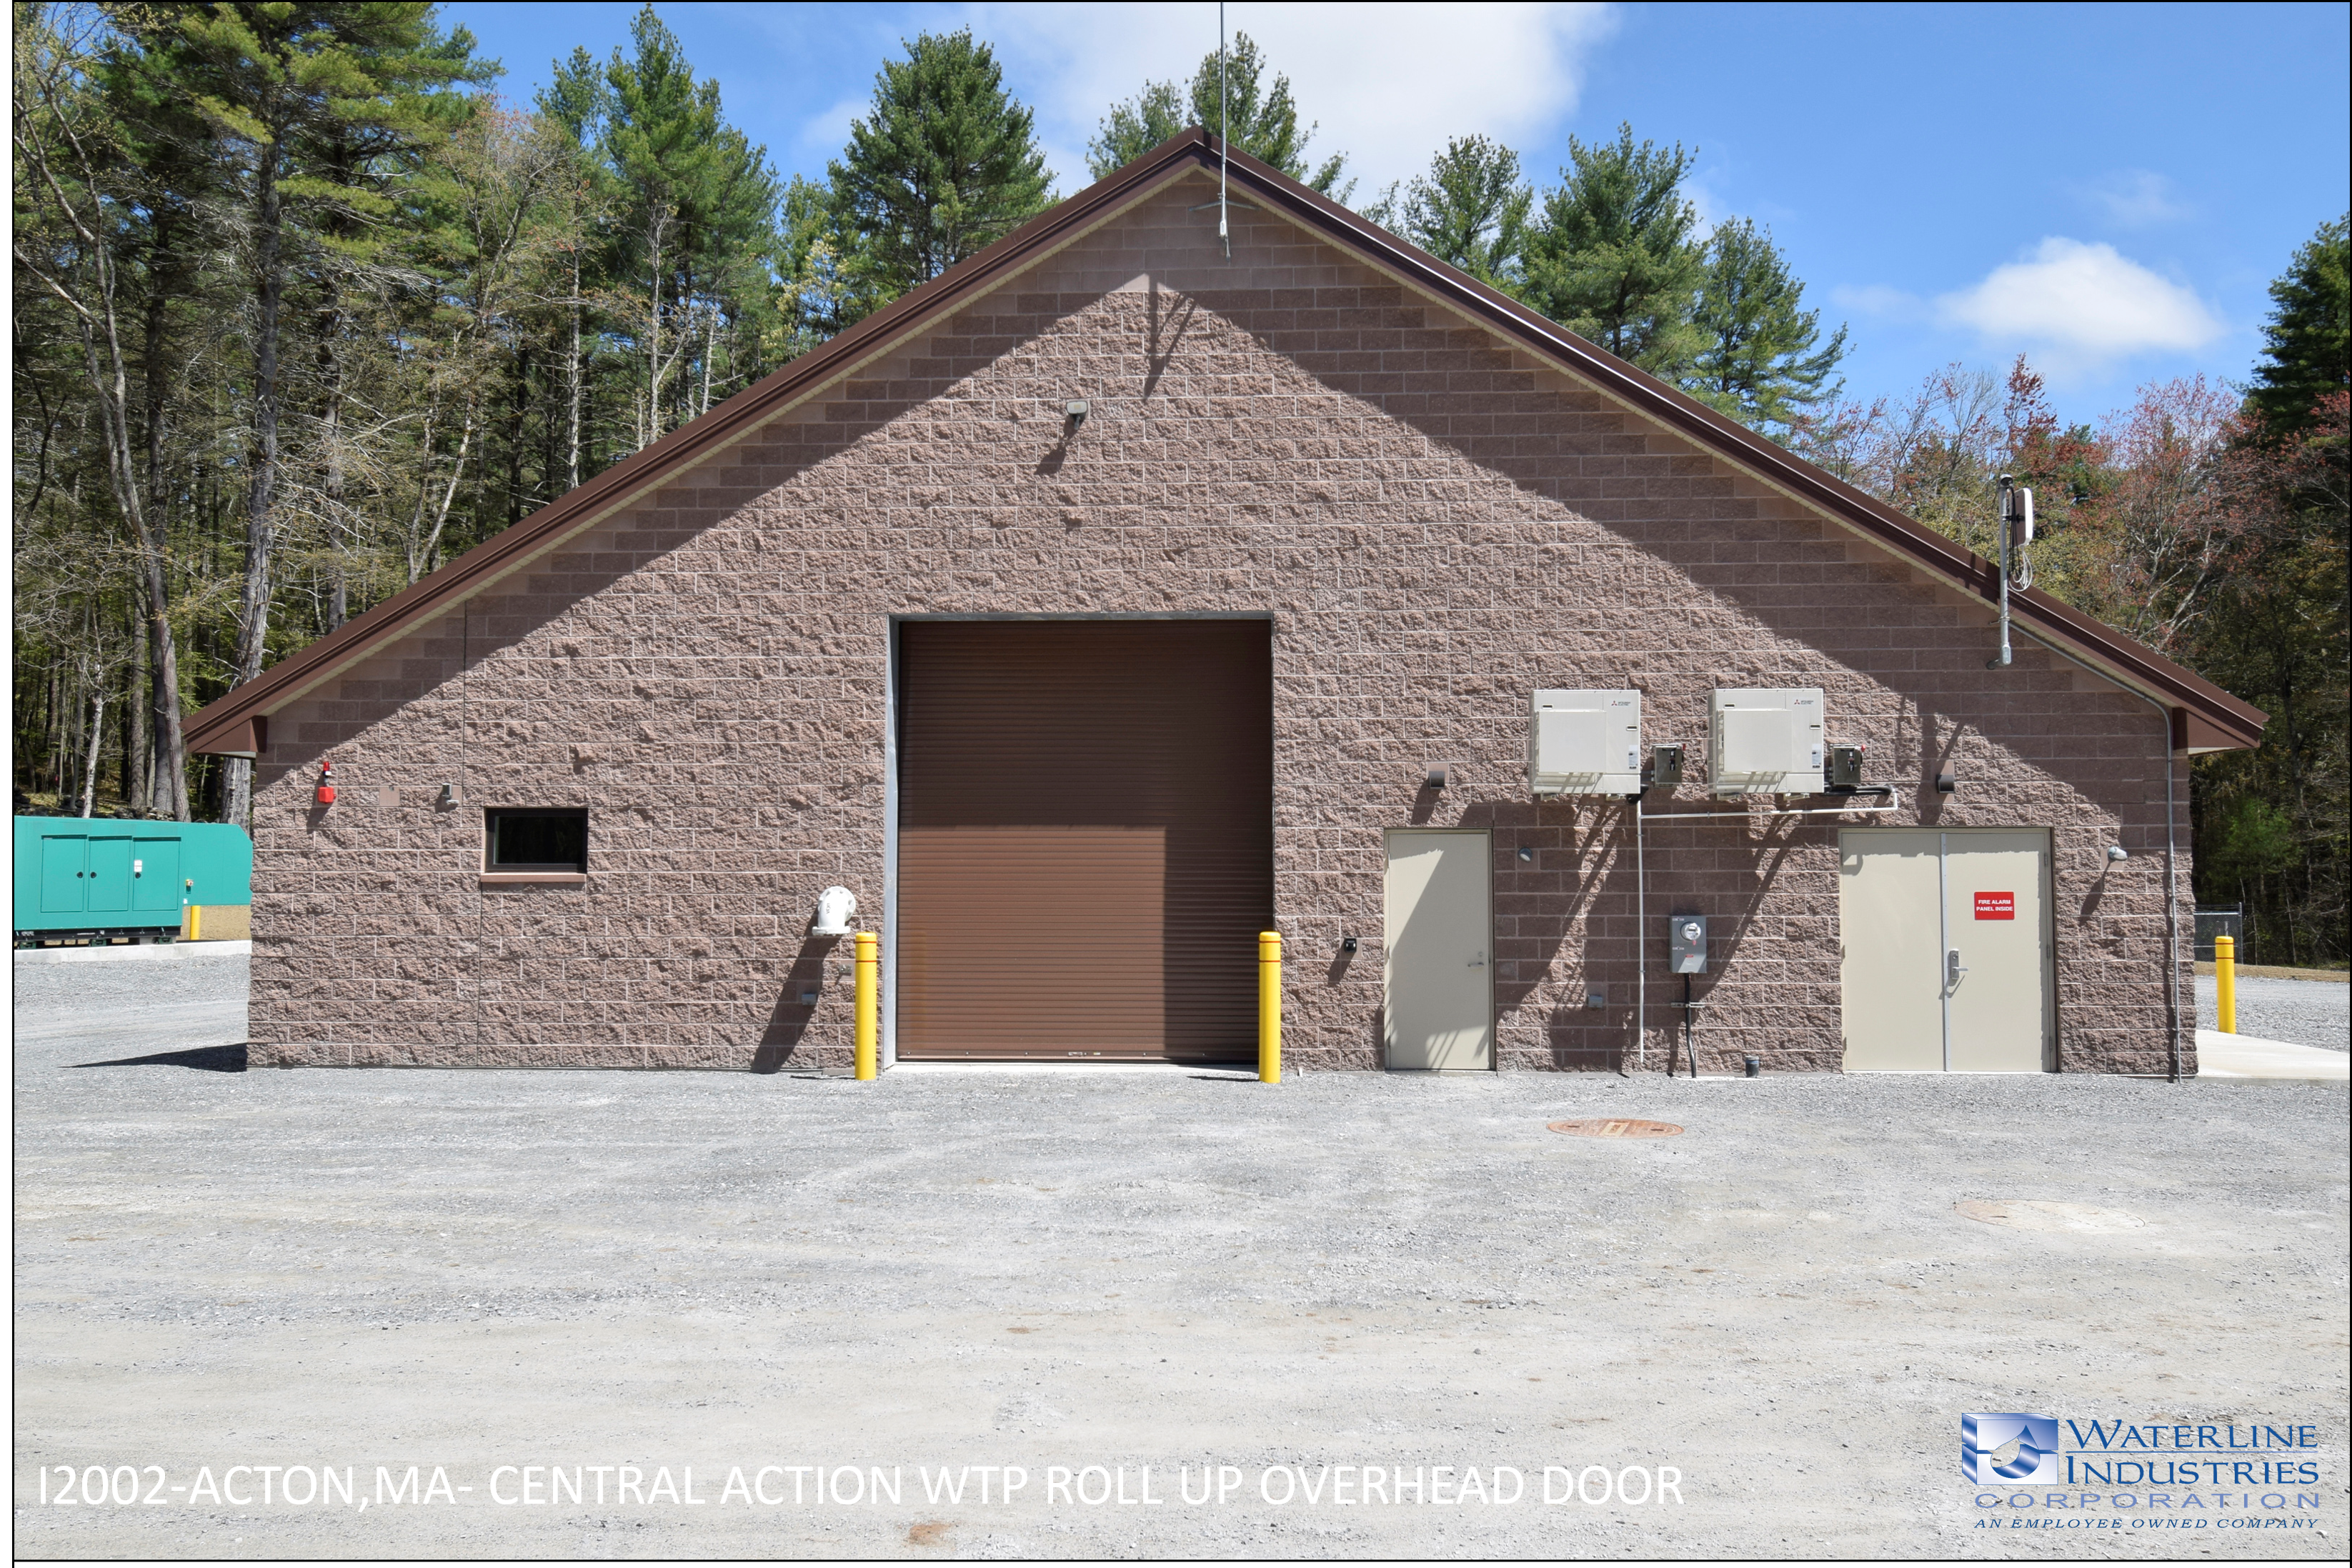 I2002-ACTON,MA-CENTRAL-ACTION-WTP-ROLL-UP-OVERHEAD-DOOR